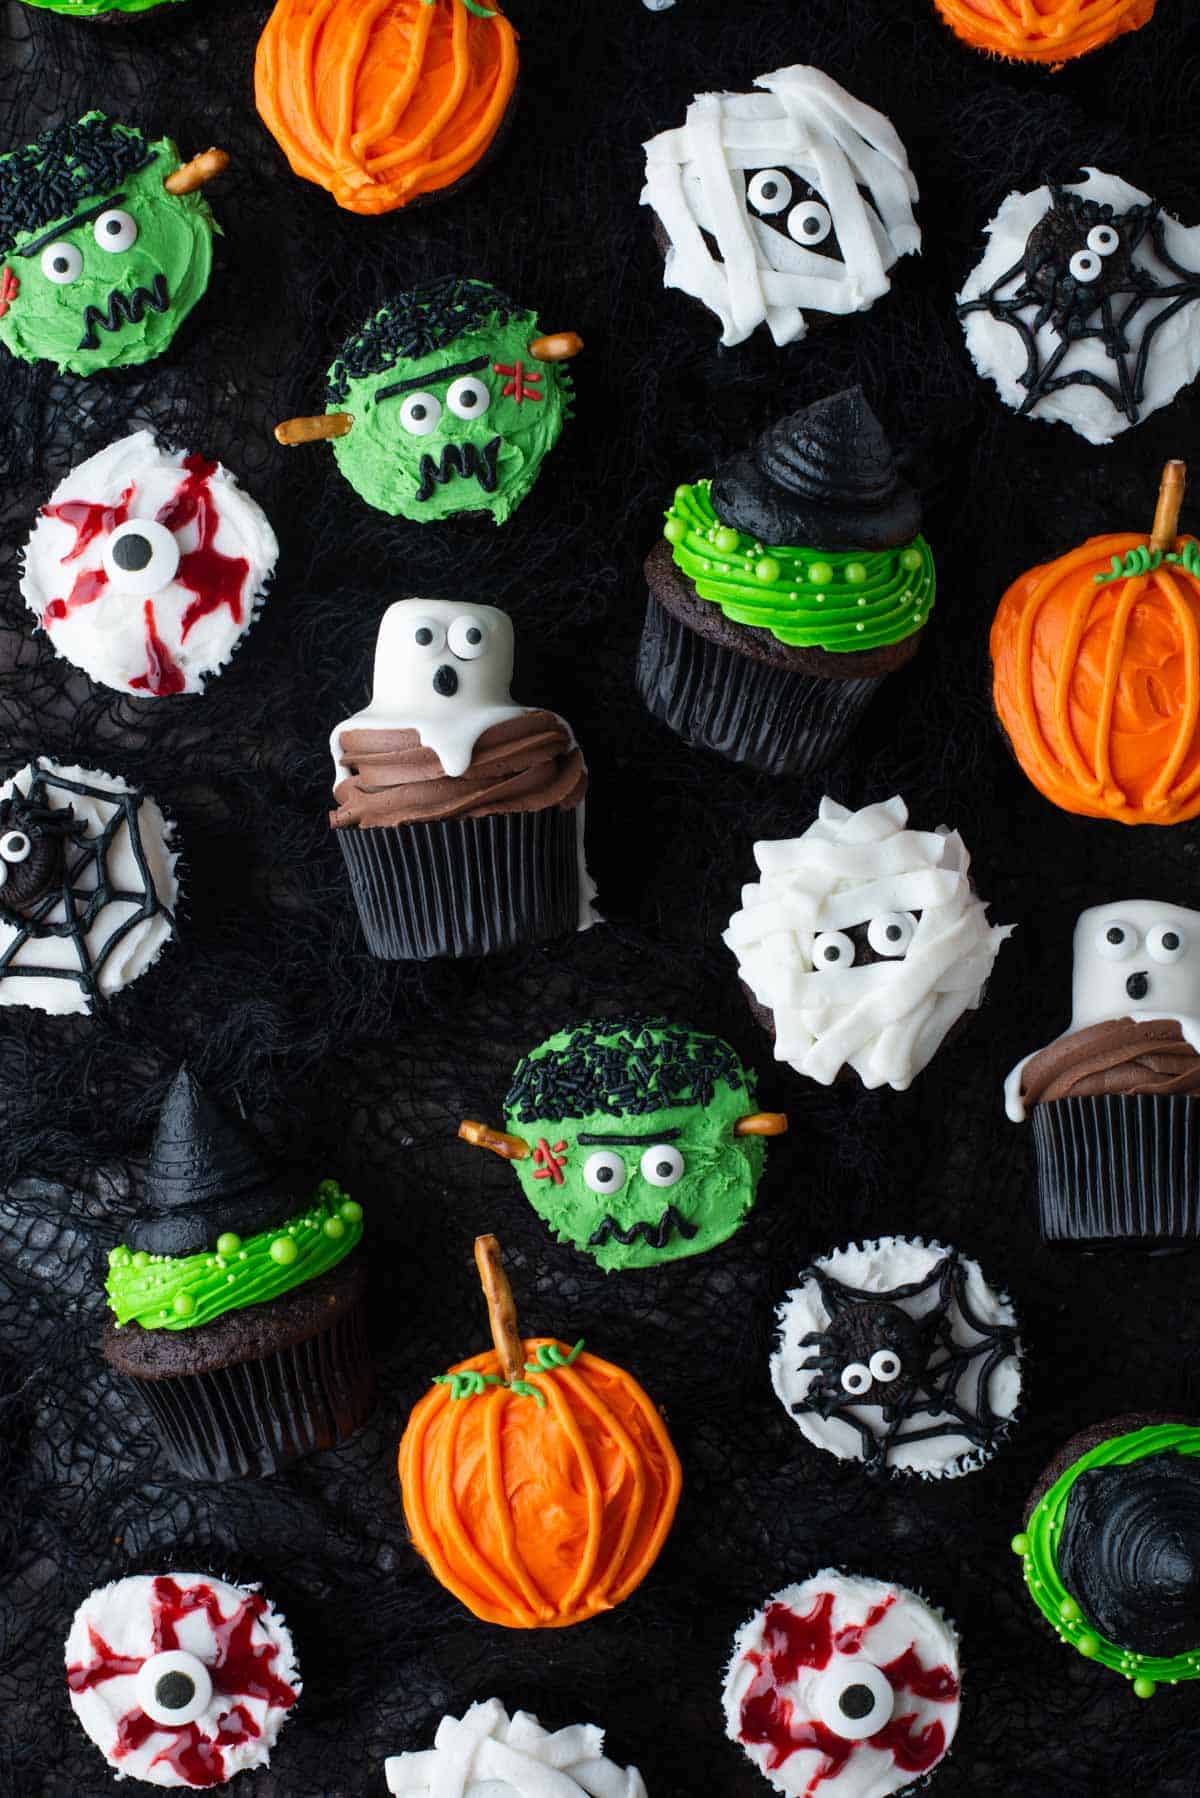 an assortment of halloween cupcakes including mummy cupcakes, pumpkin cupcakes, spider web cupcakes, witch hat cupcakes and ghost cupcakes